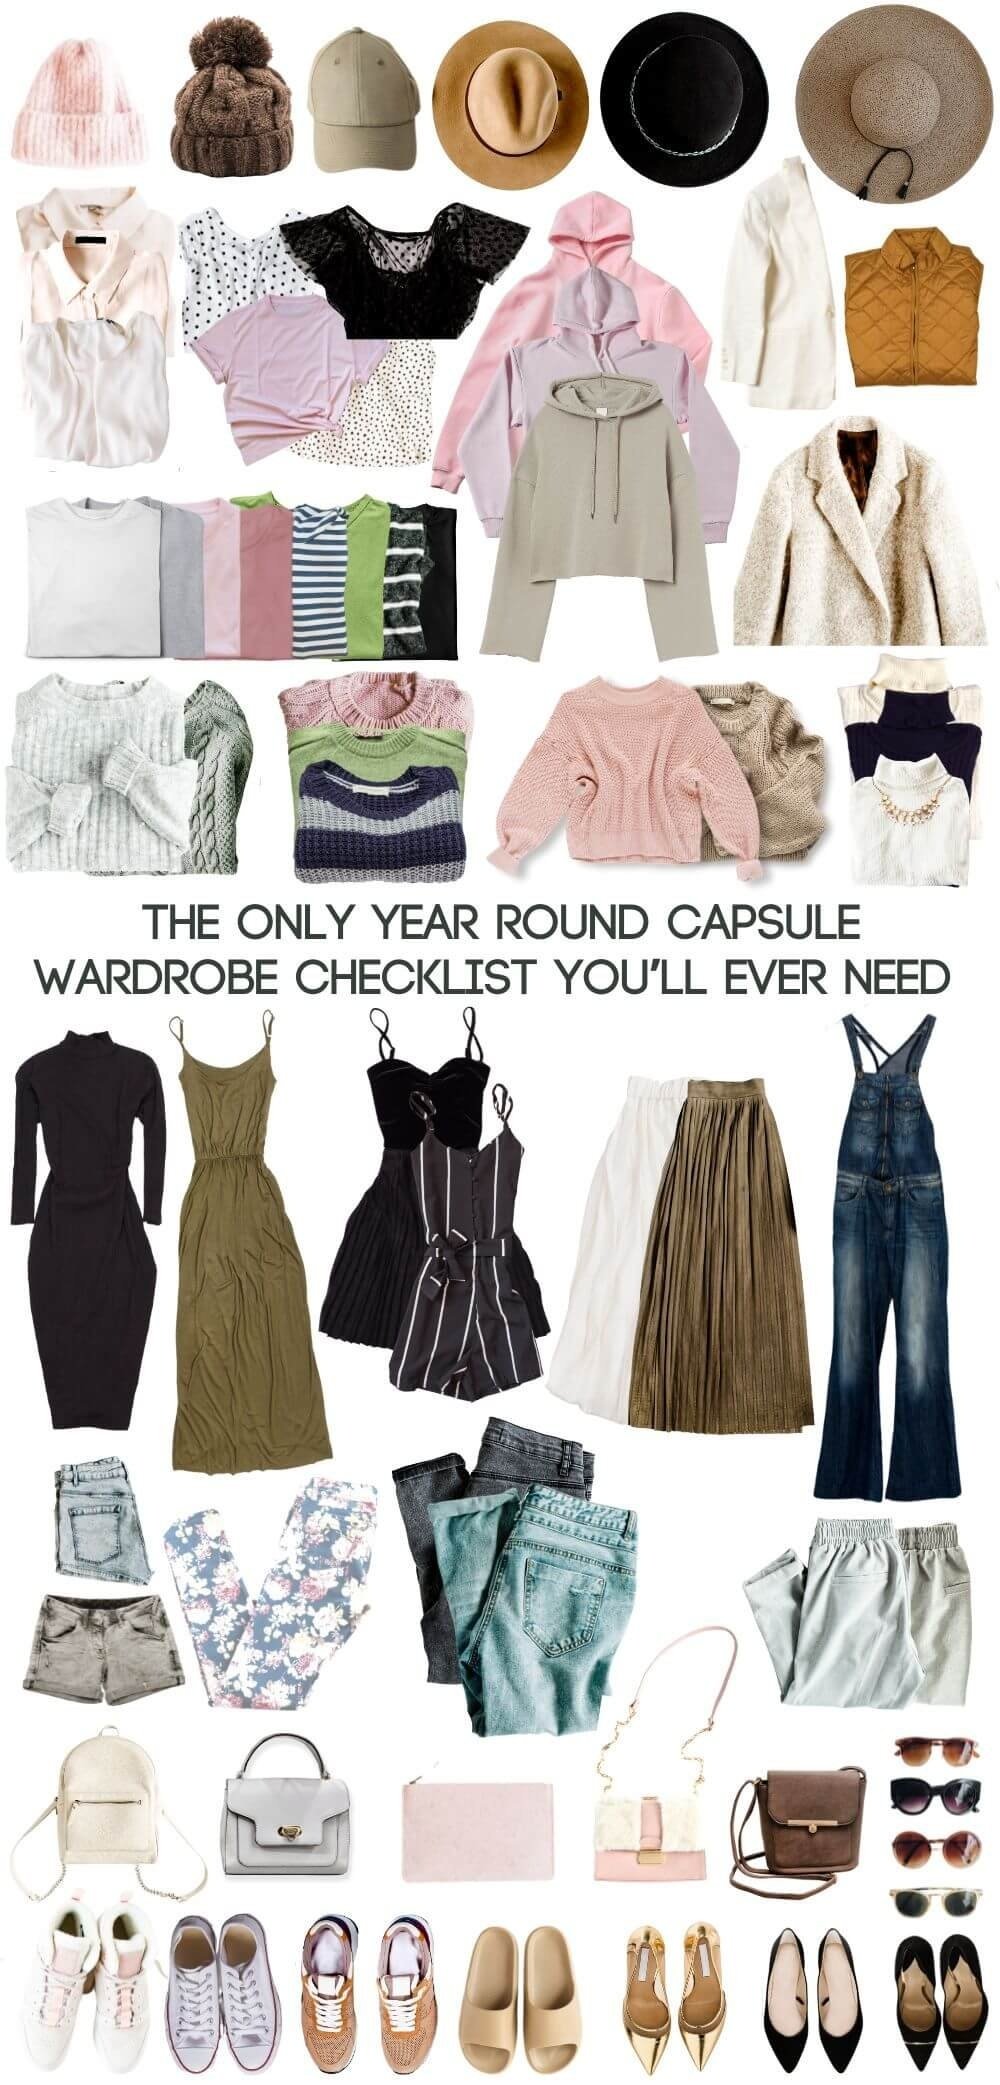 The Only Year Round Capsule Wardrobe Checklist You'll Ever Need